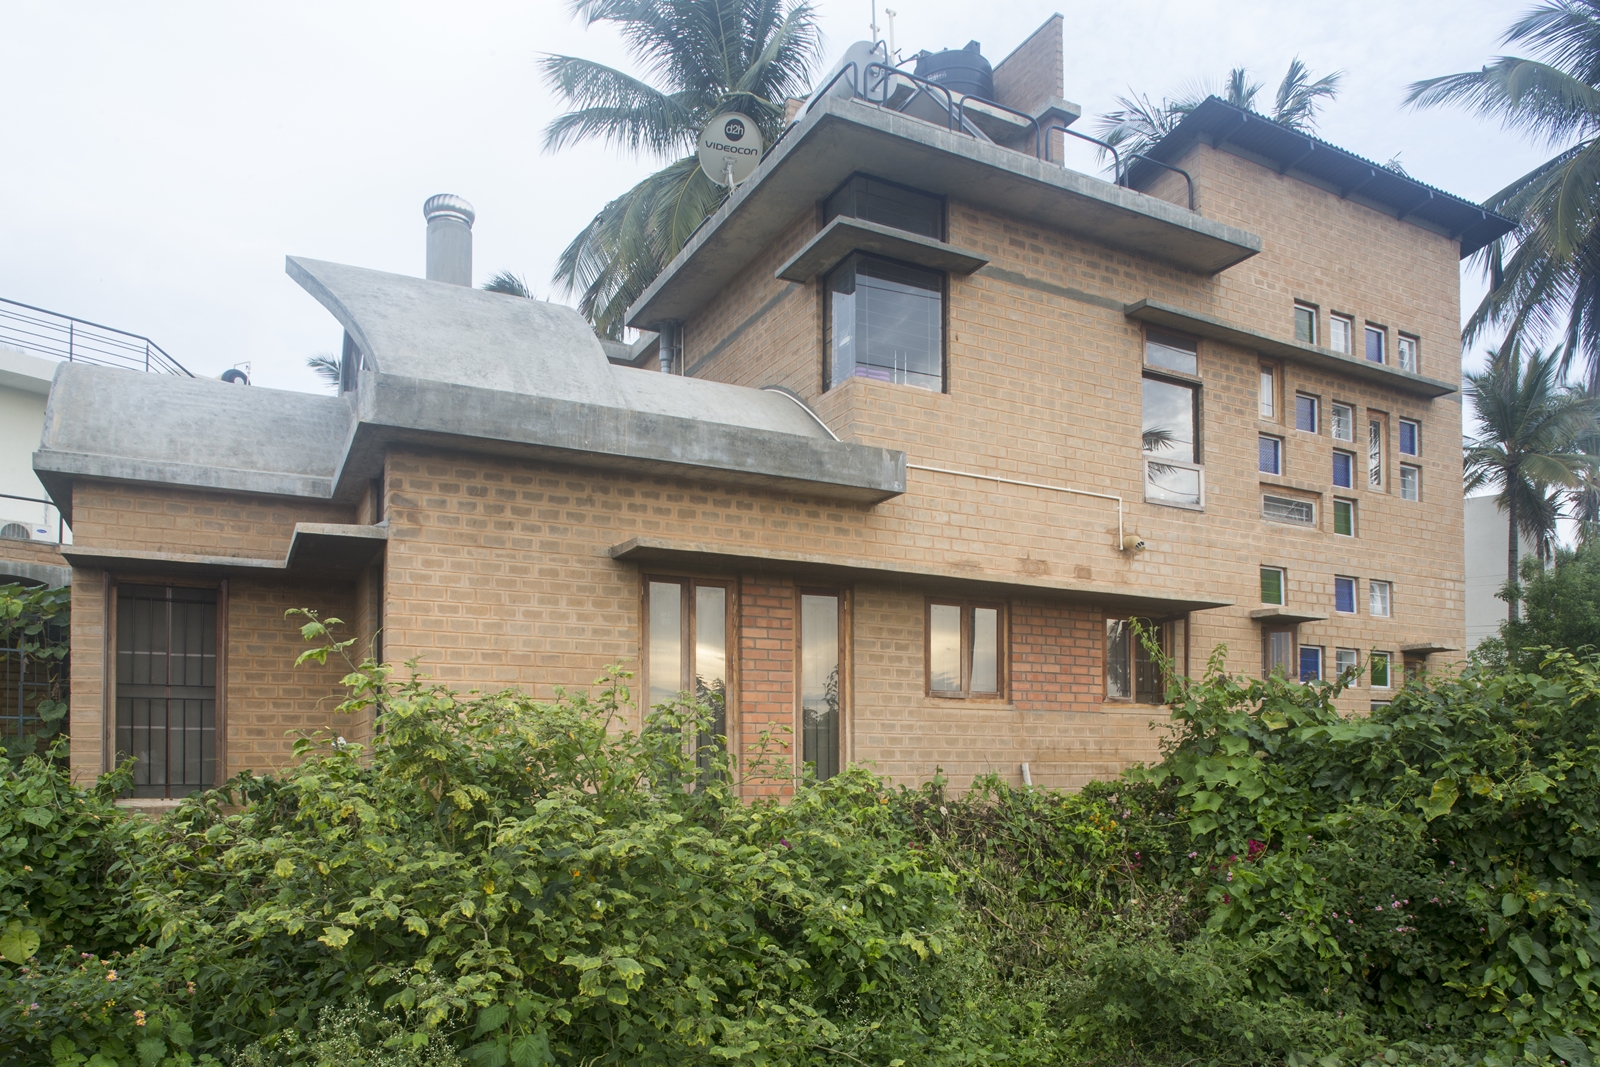 Residence for Charis, at Bangalore, by Biome Environmental